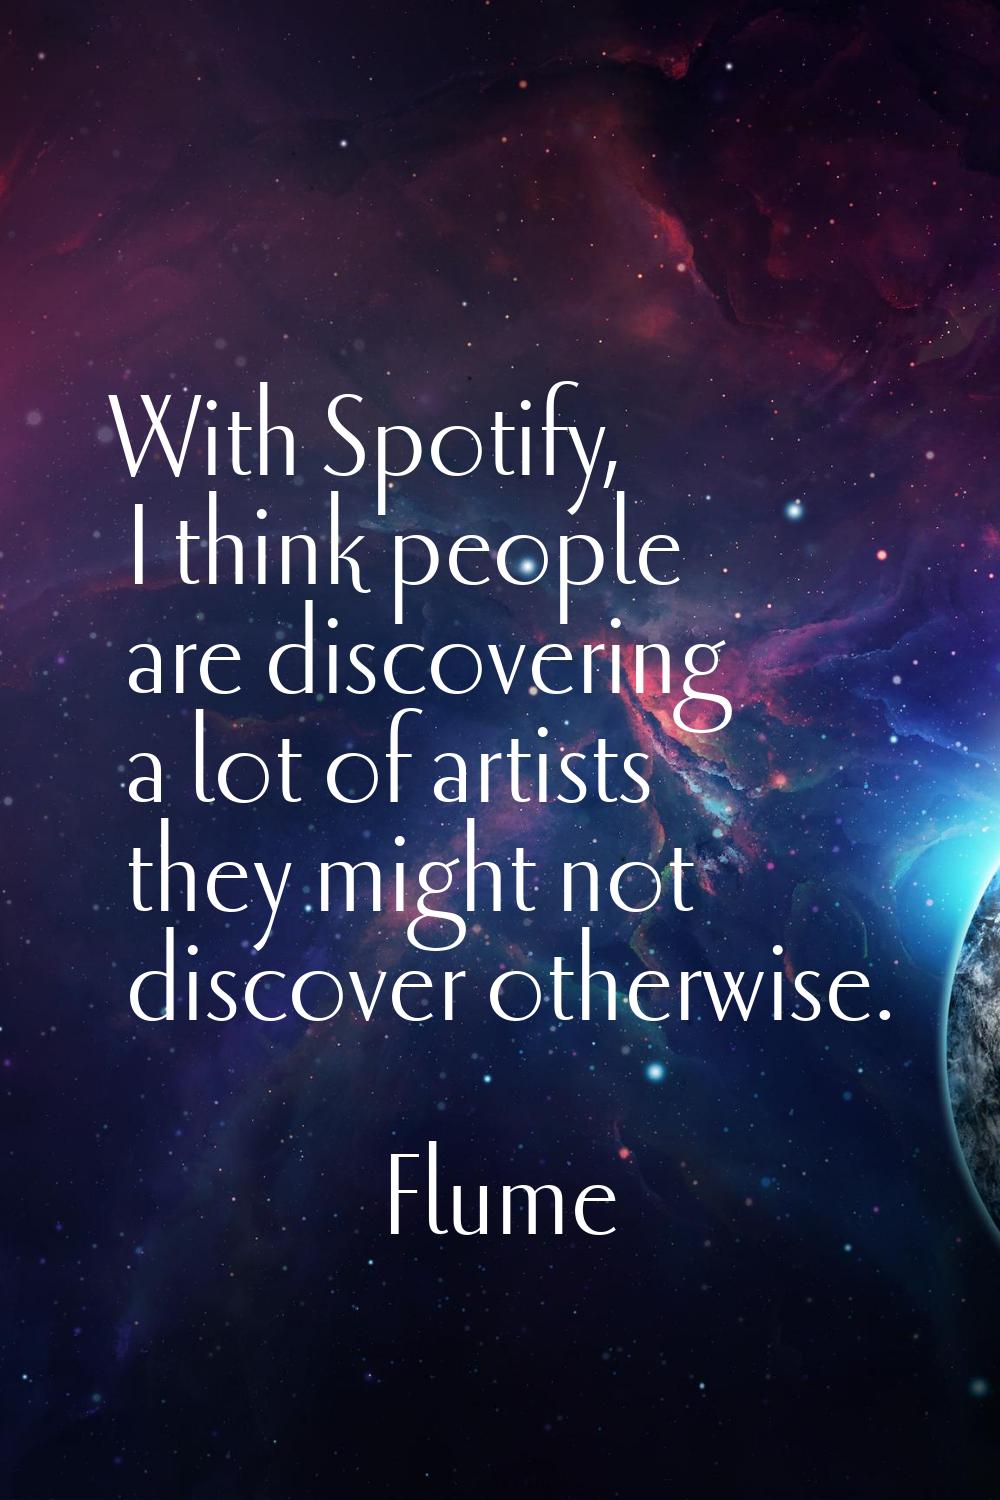 With Spotify, I think people are discovering a lot of artists they might not discover otherwise.